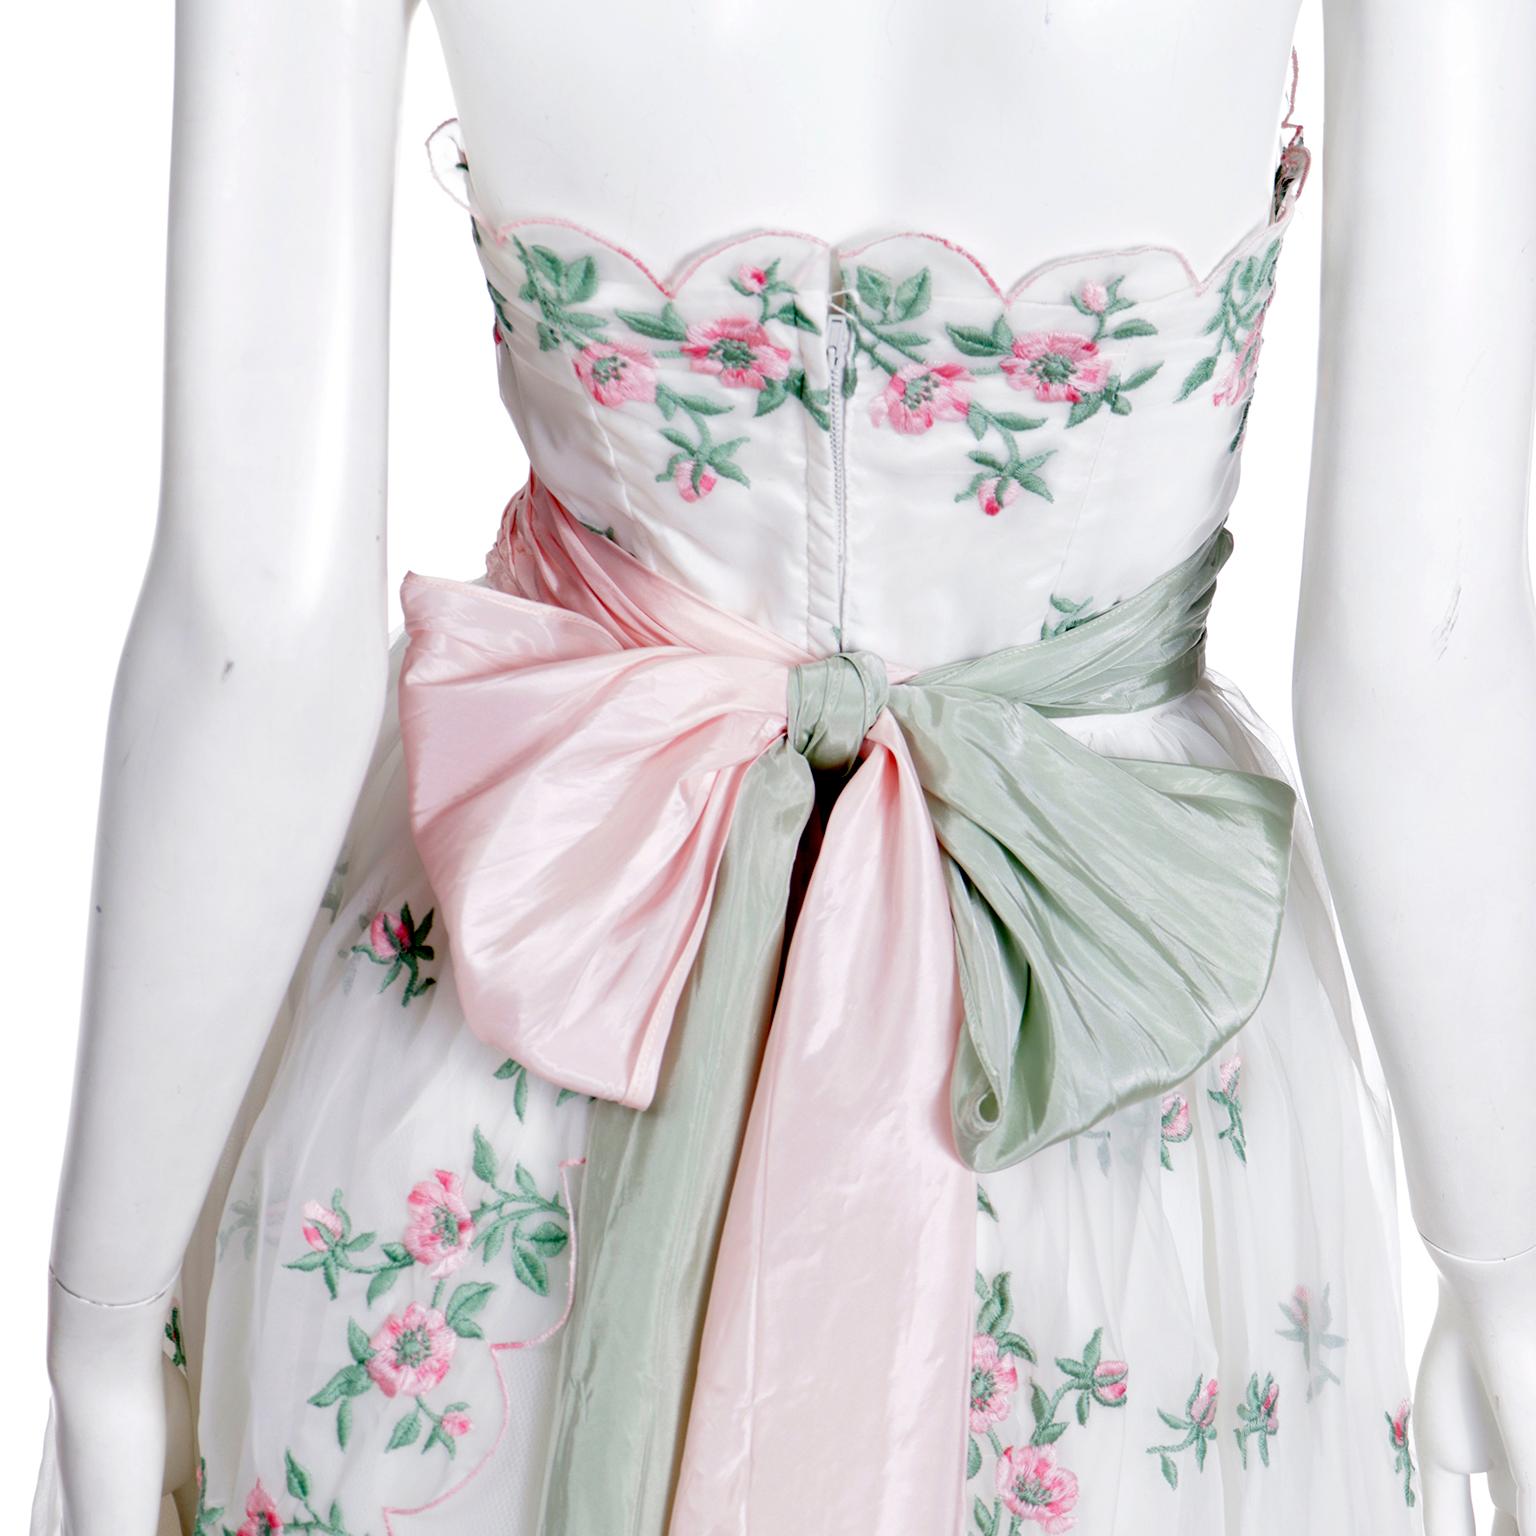 Emma Domb 1950's White Party Dress w Pink and Green Embroidered Flowers For Sale 5